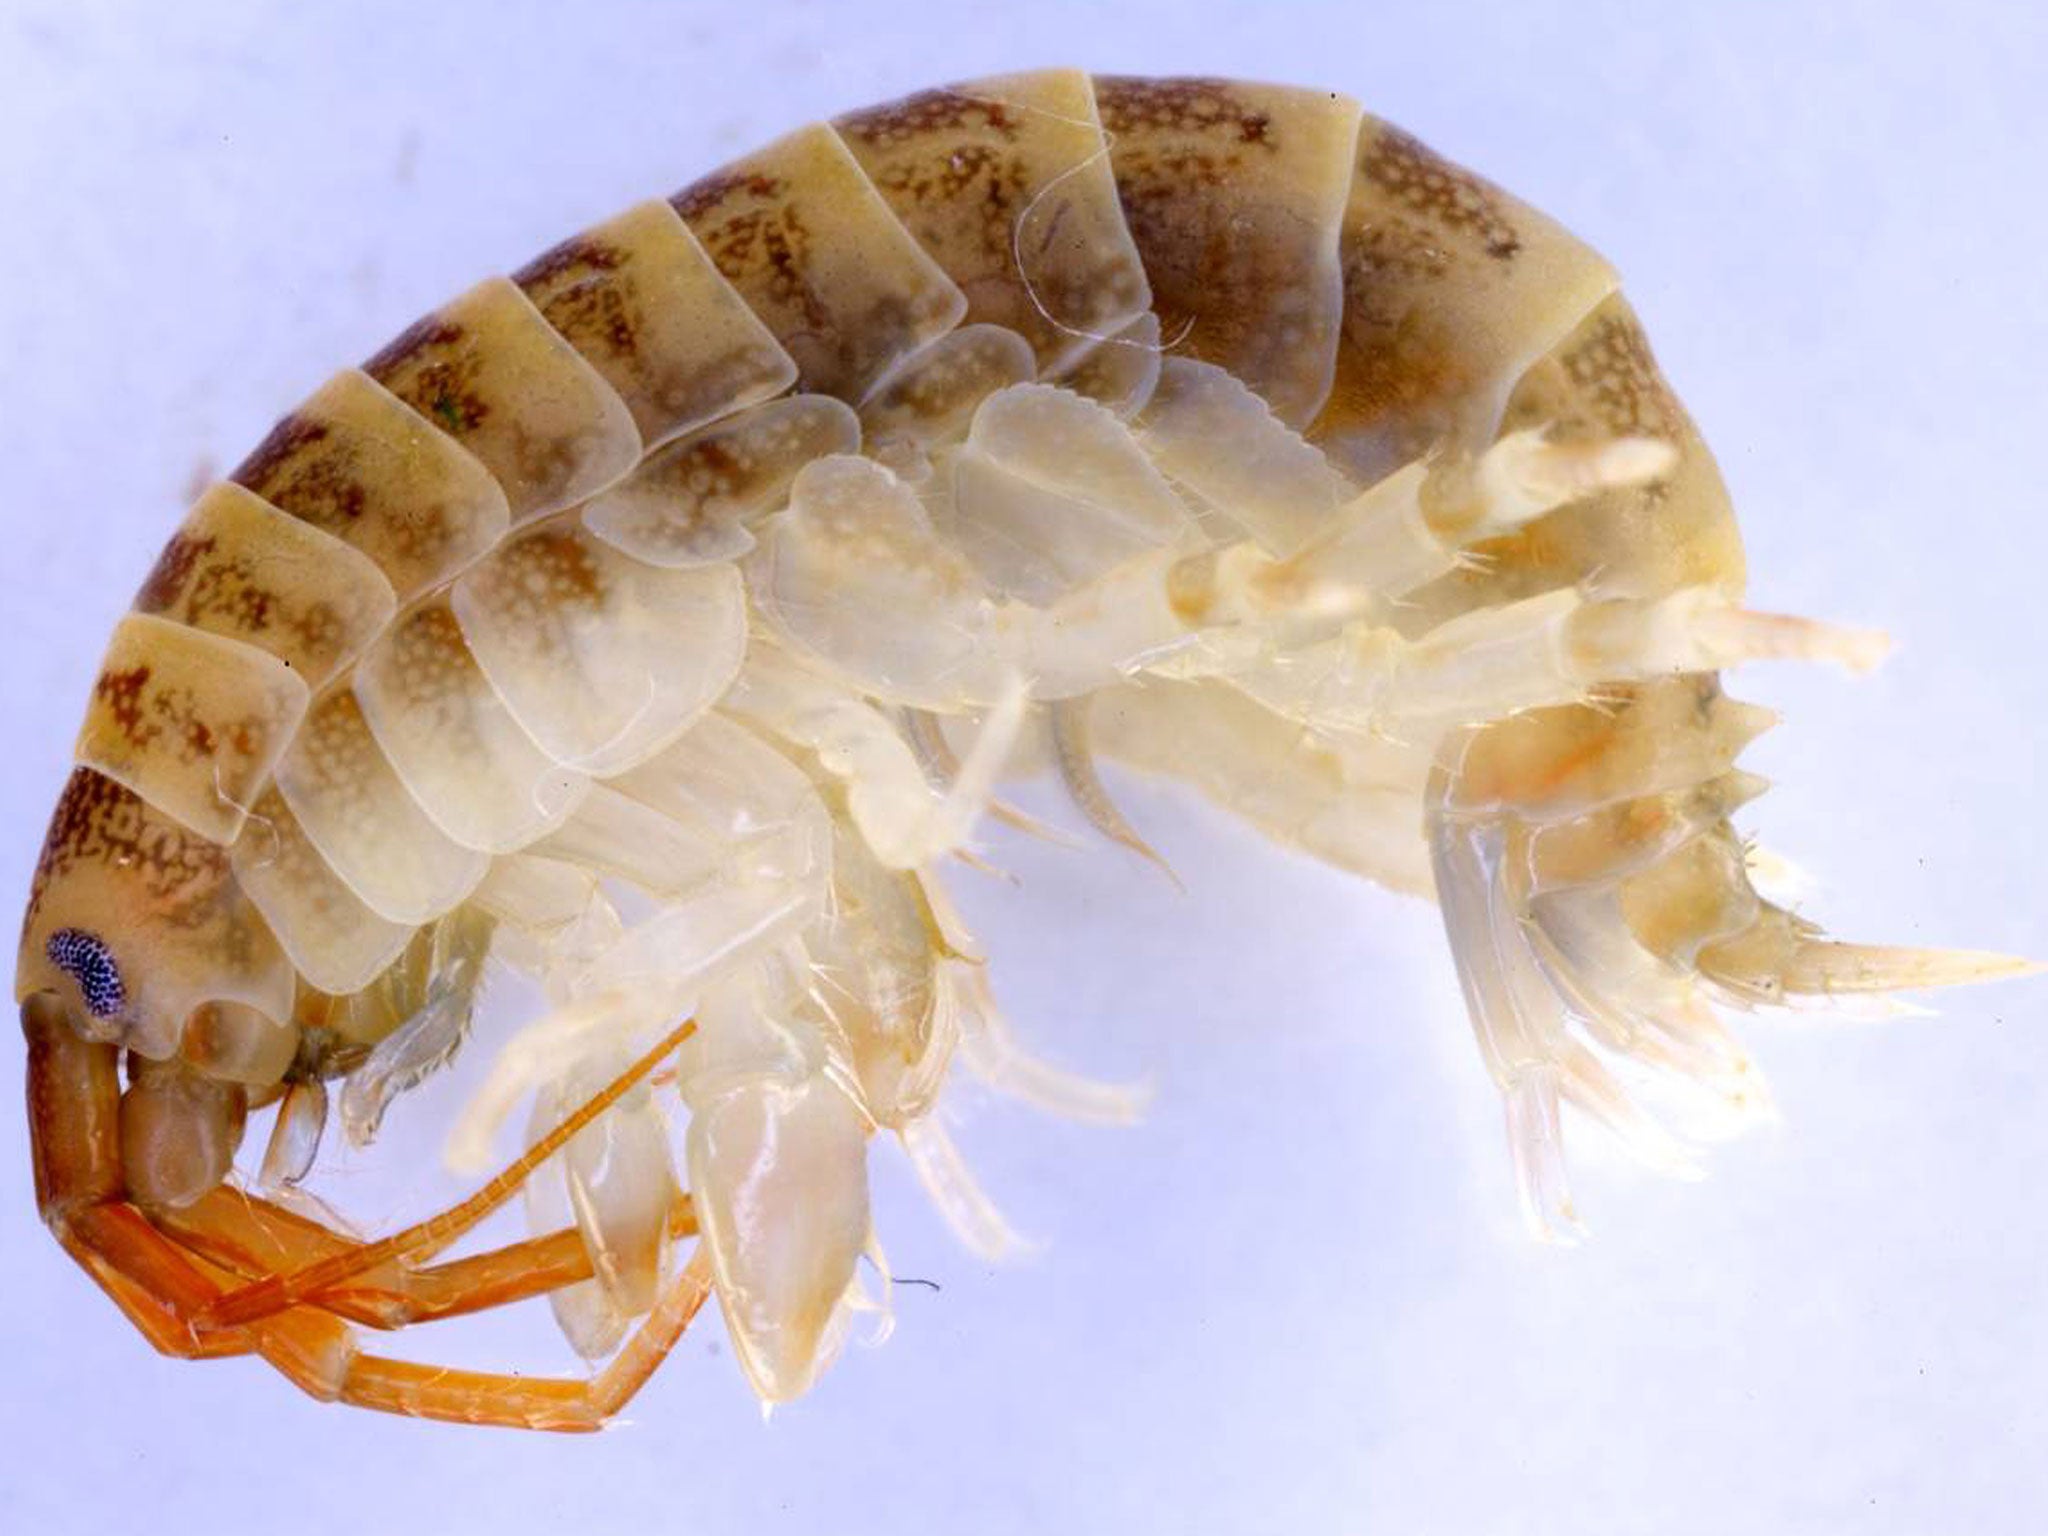 The snapping noise made by shrimps is used by many marine creatures to find food and shelter